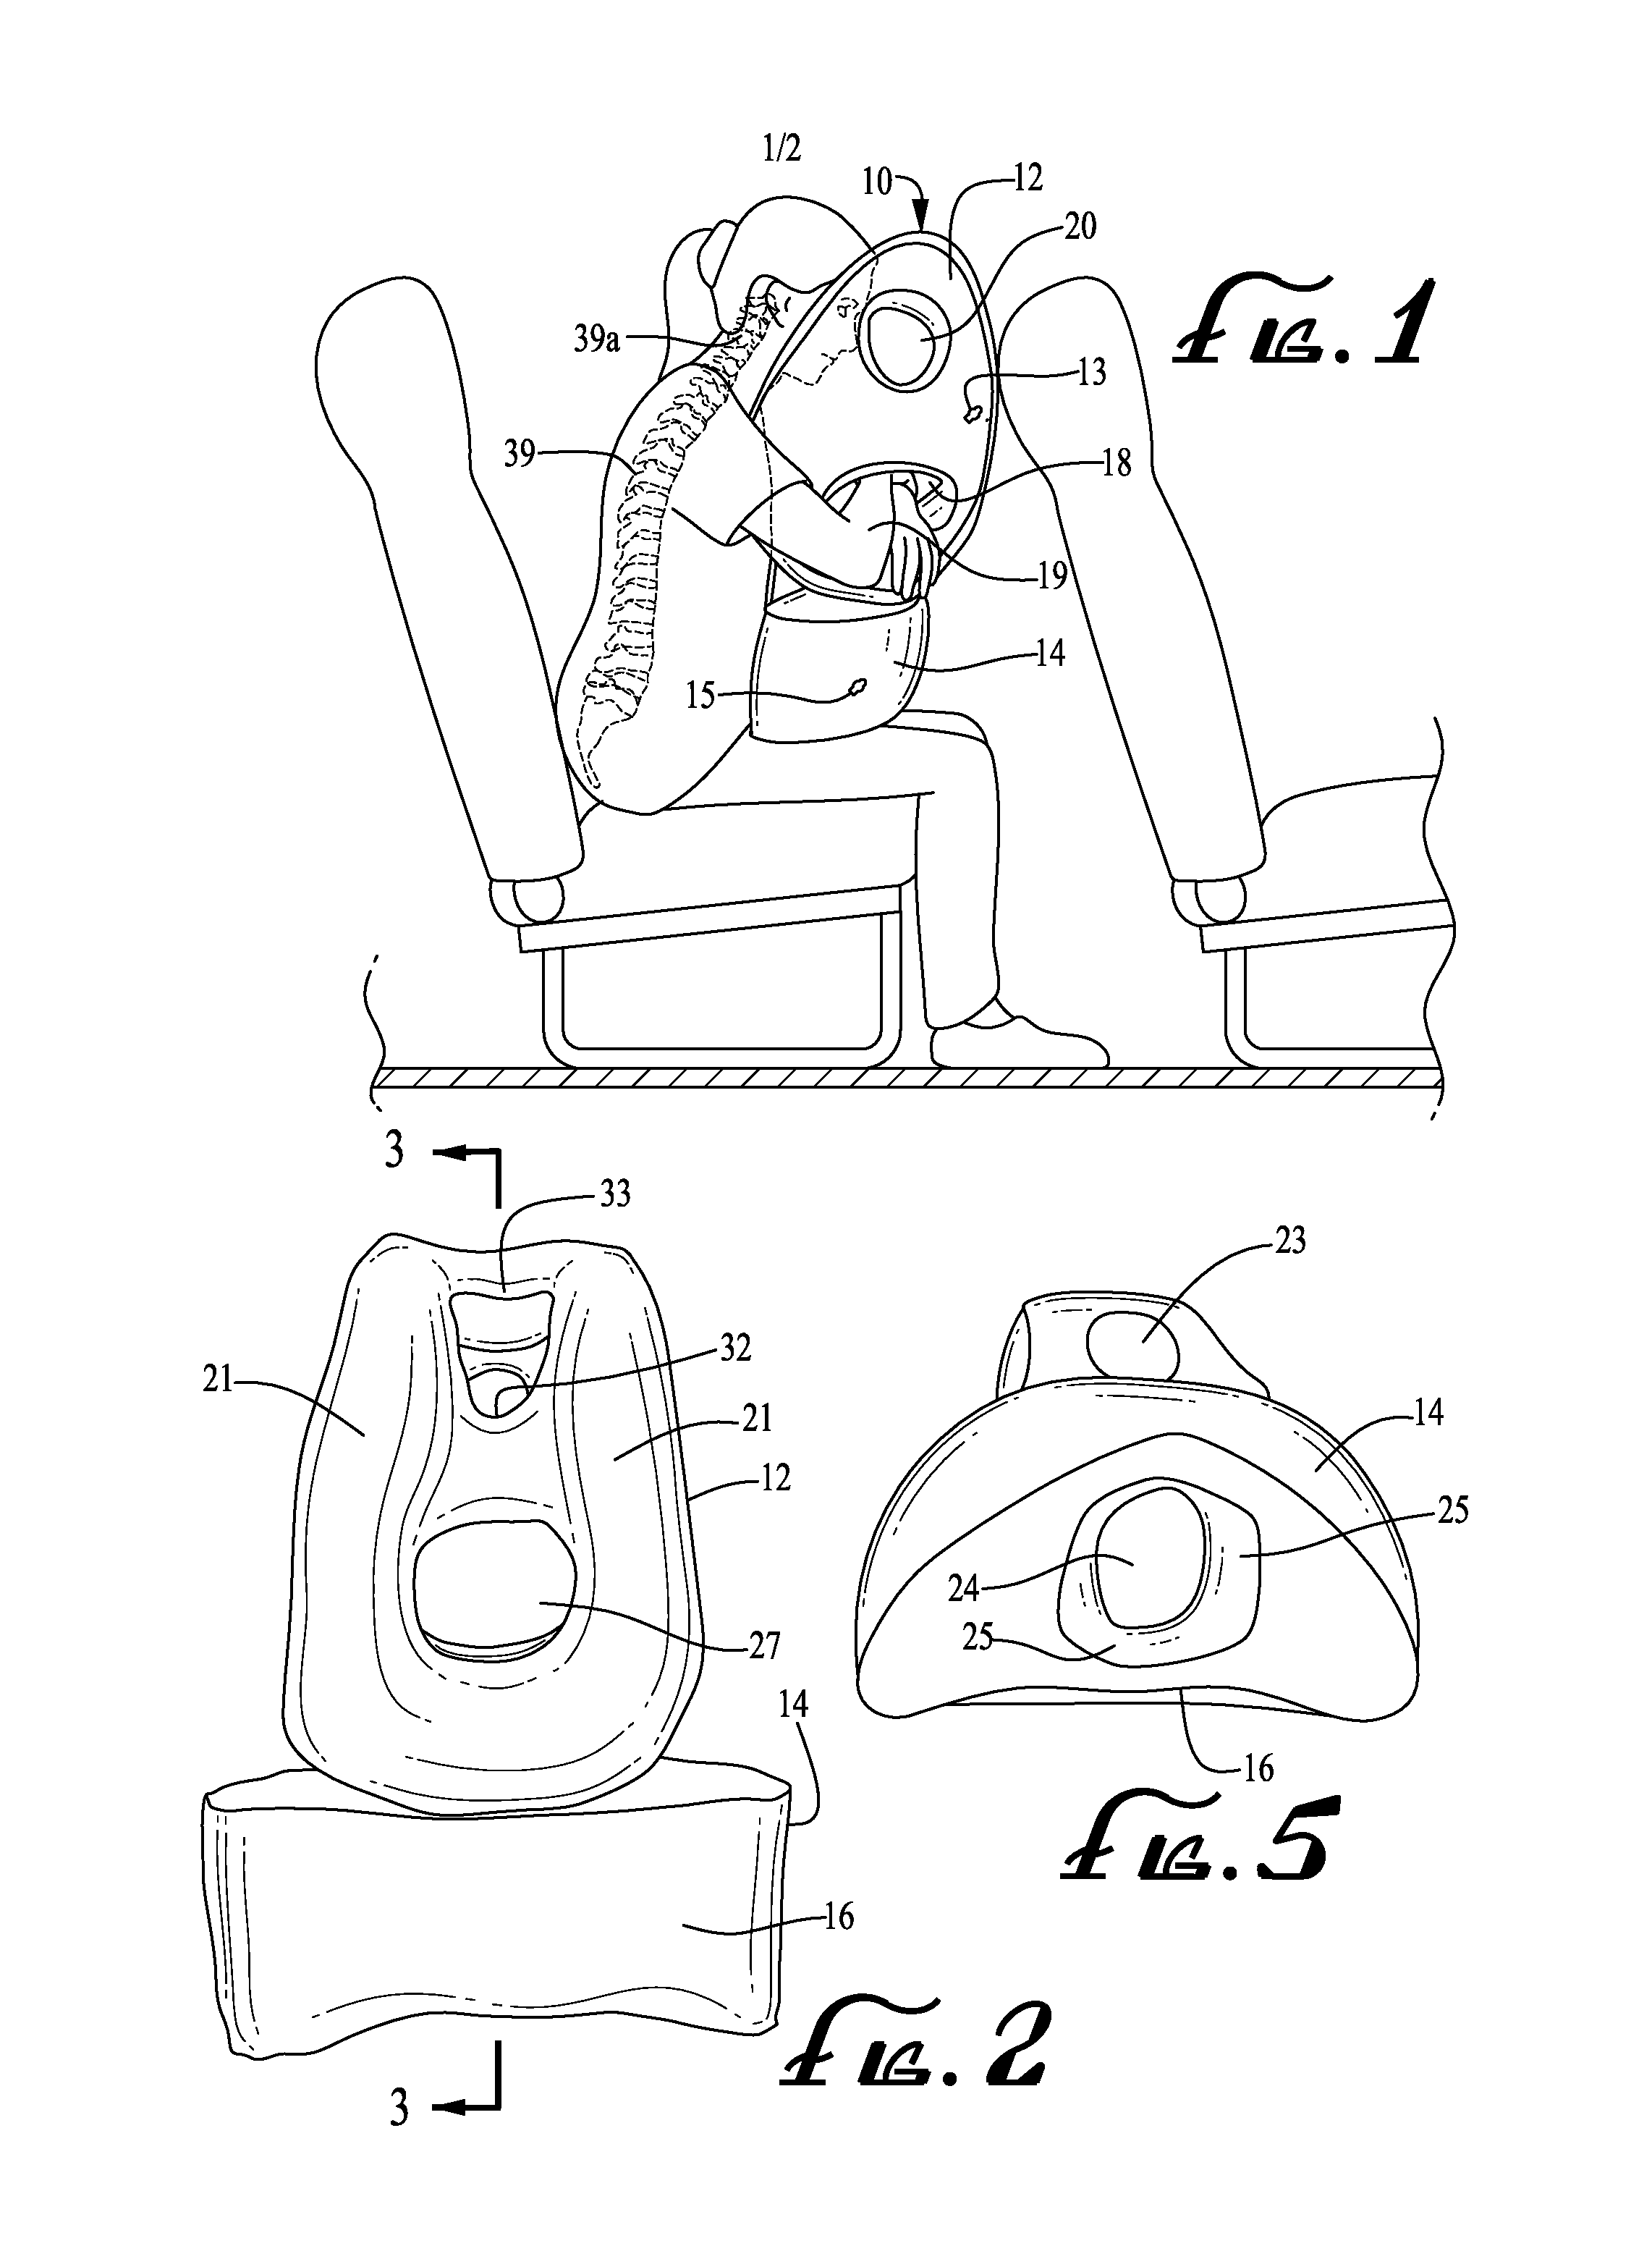 Inflatable resting pillow